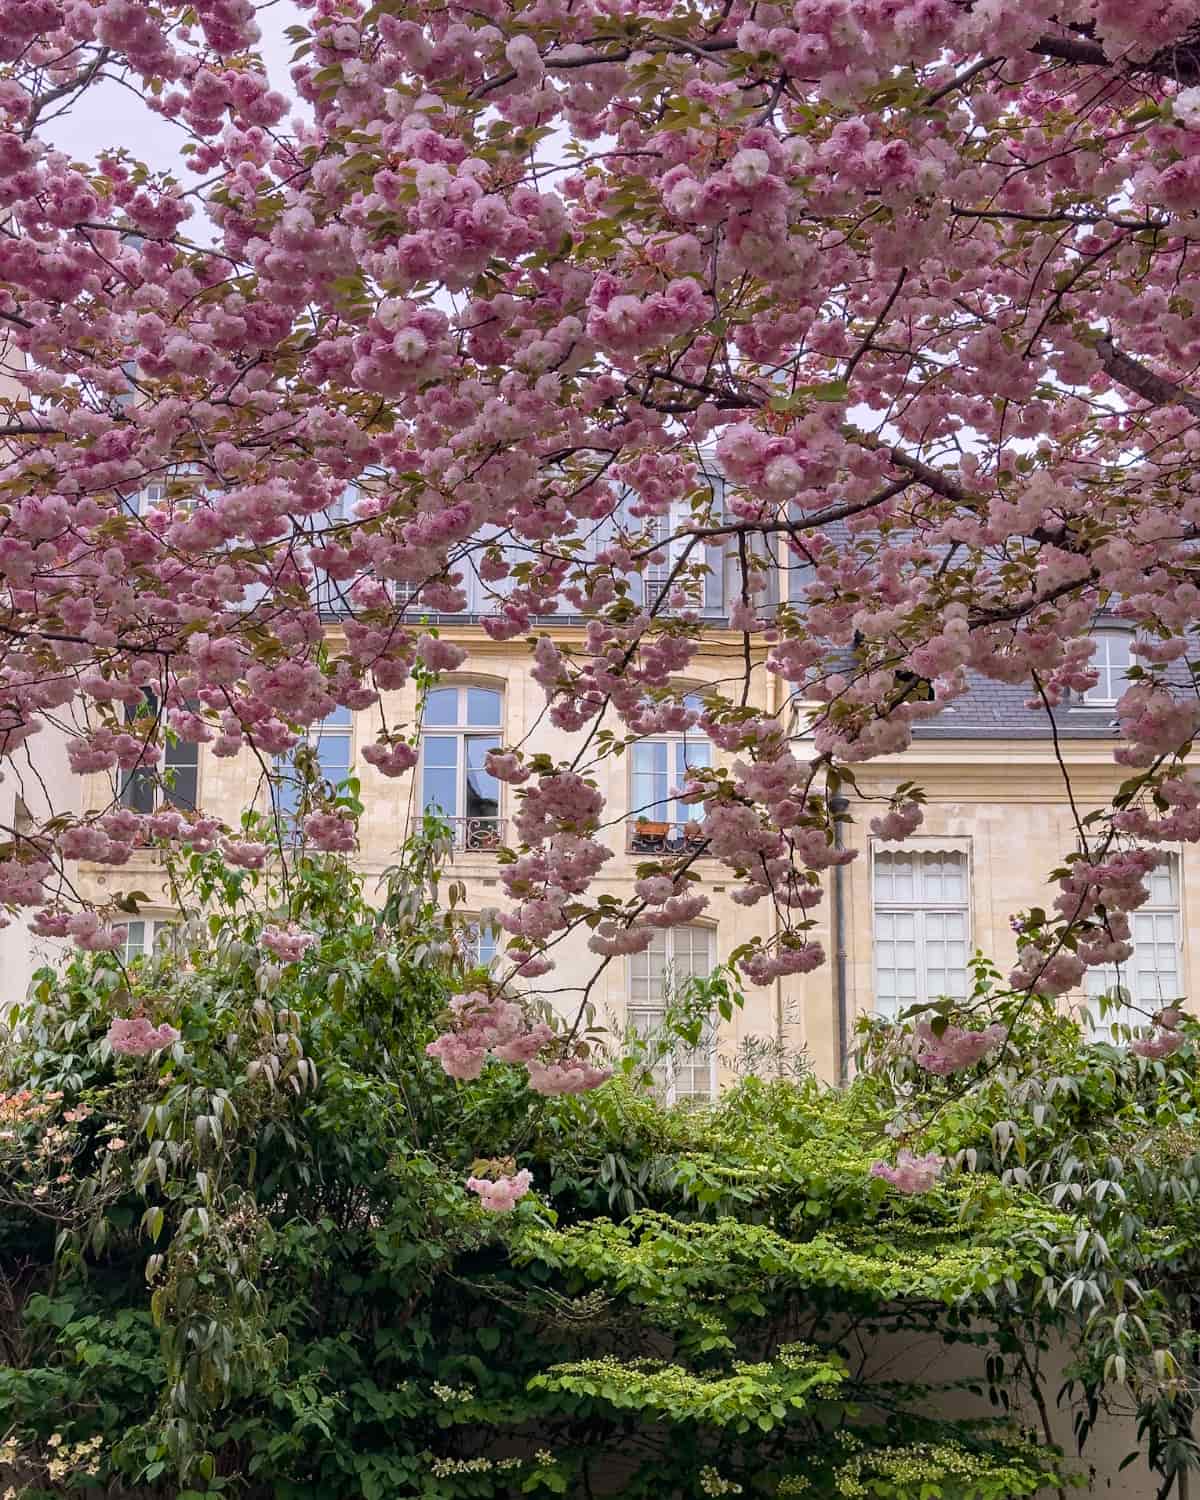 Blooming cherry blossom trees at Jardin Anne Frank